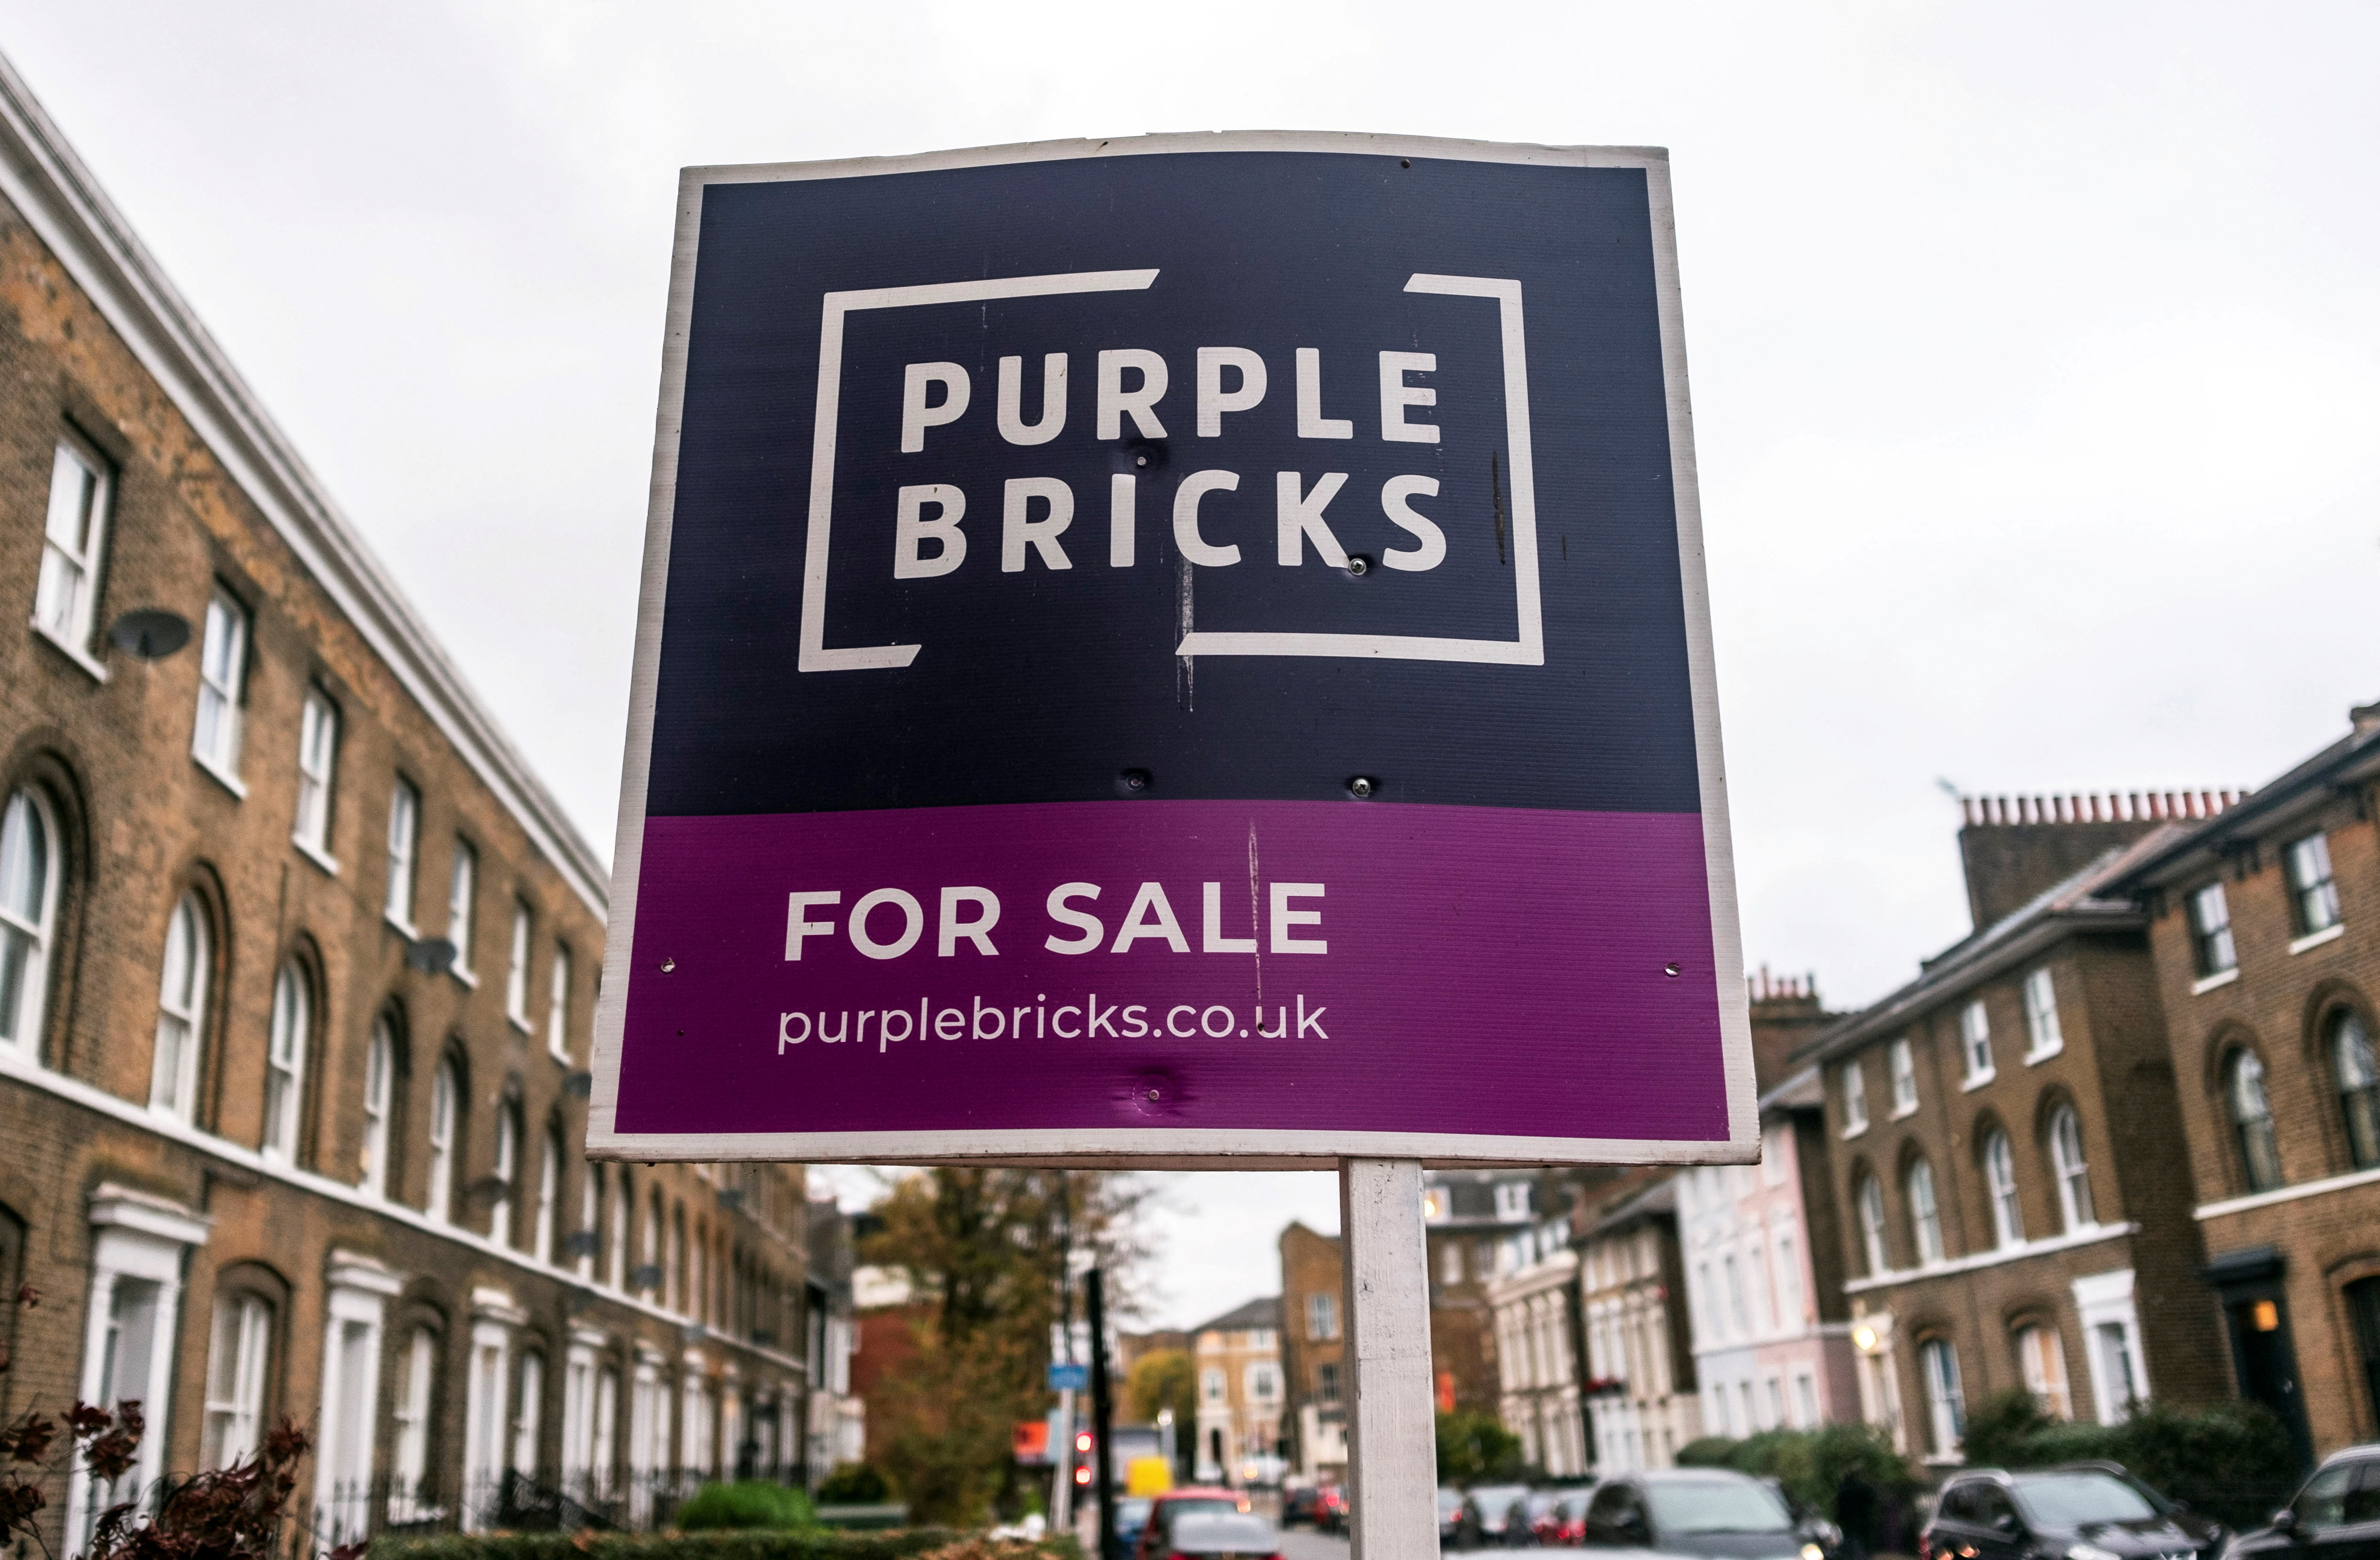 Sign for online estate agent Purplebricks is pictured outside a property in London